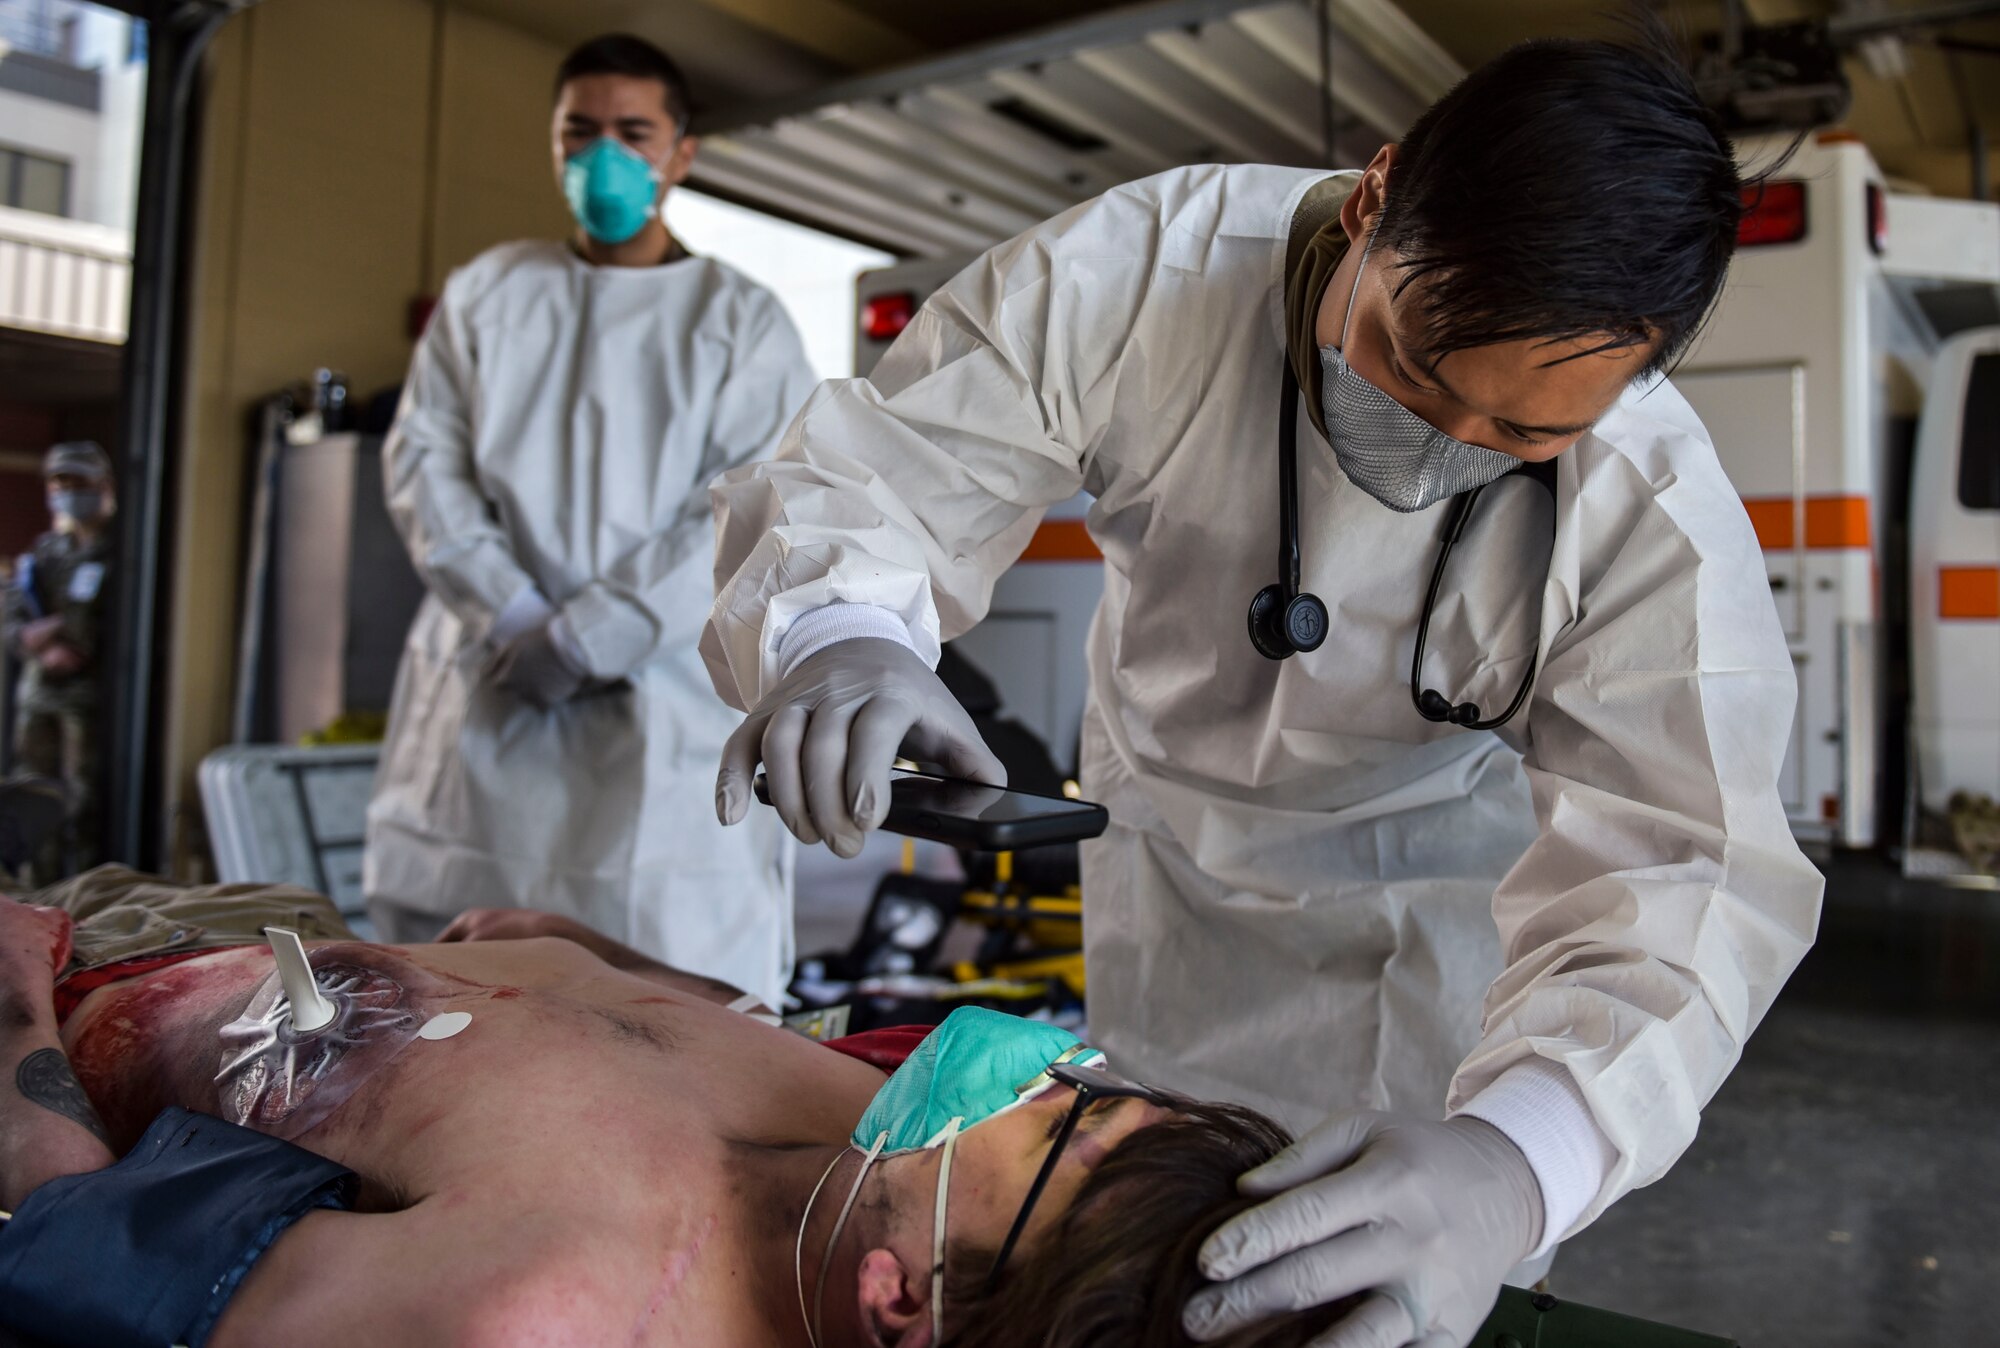 U.S. Air Force Capt. Jacob Thomas, 92nd Operational Medical Readiness Squadron physician, treats a simulated patient during Exercise Ready Eagle at Fairchild Air Force Base, Washington, Aug. 27, 2021.